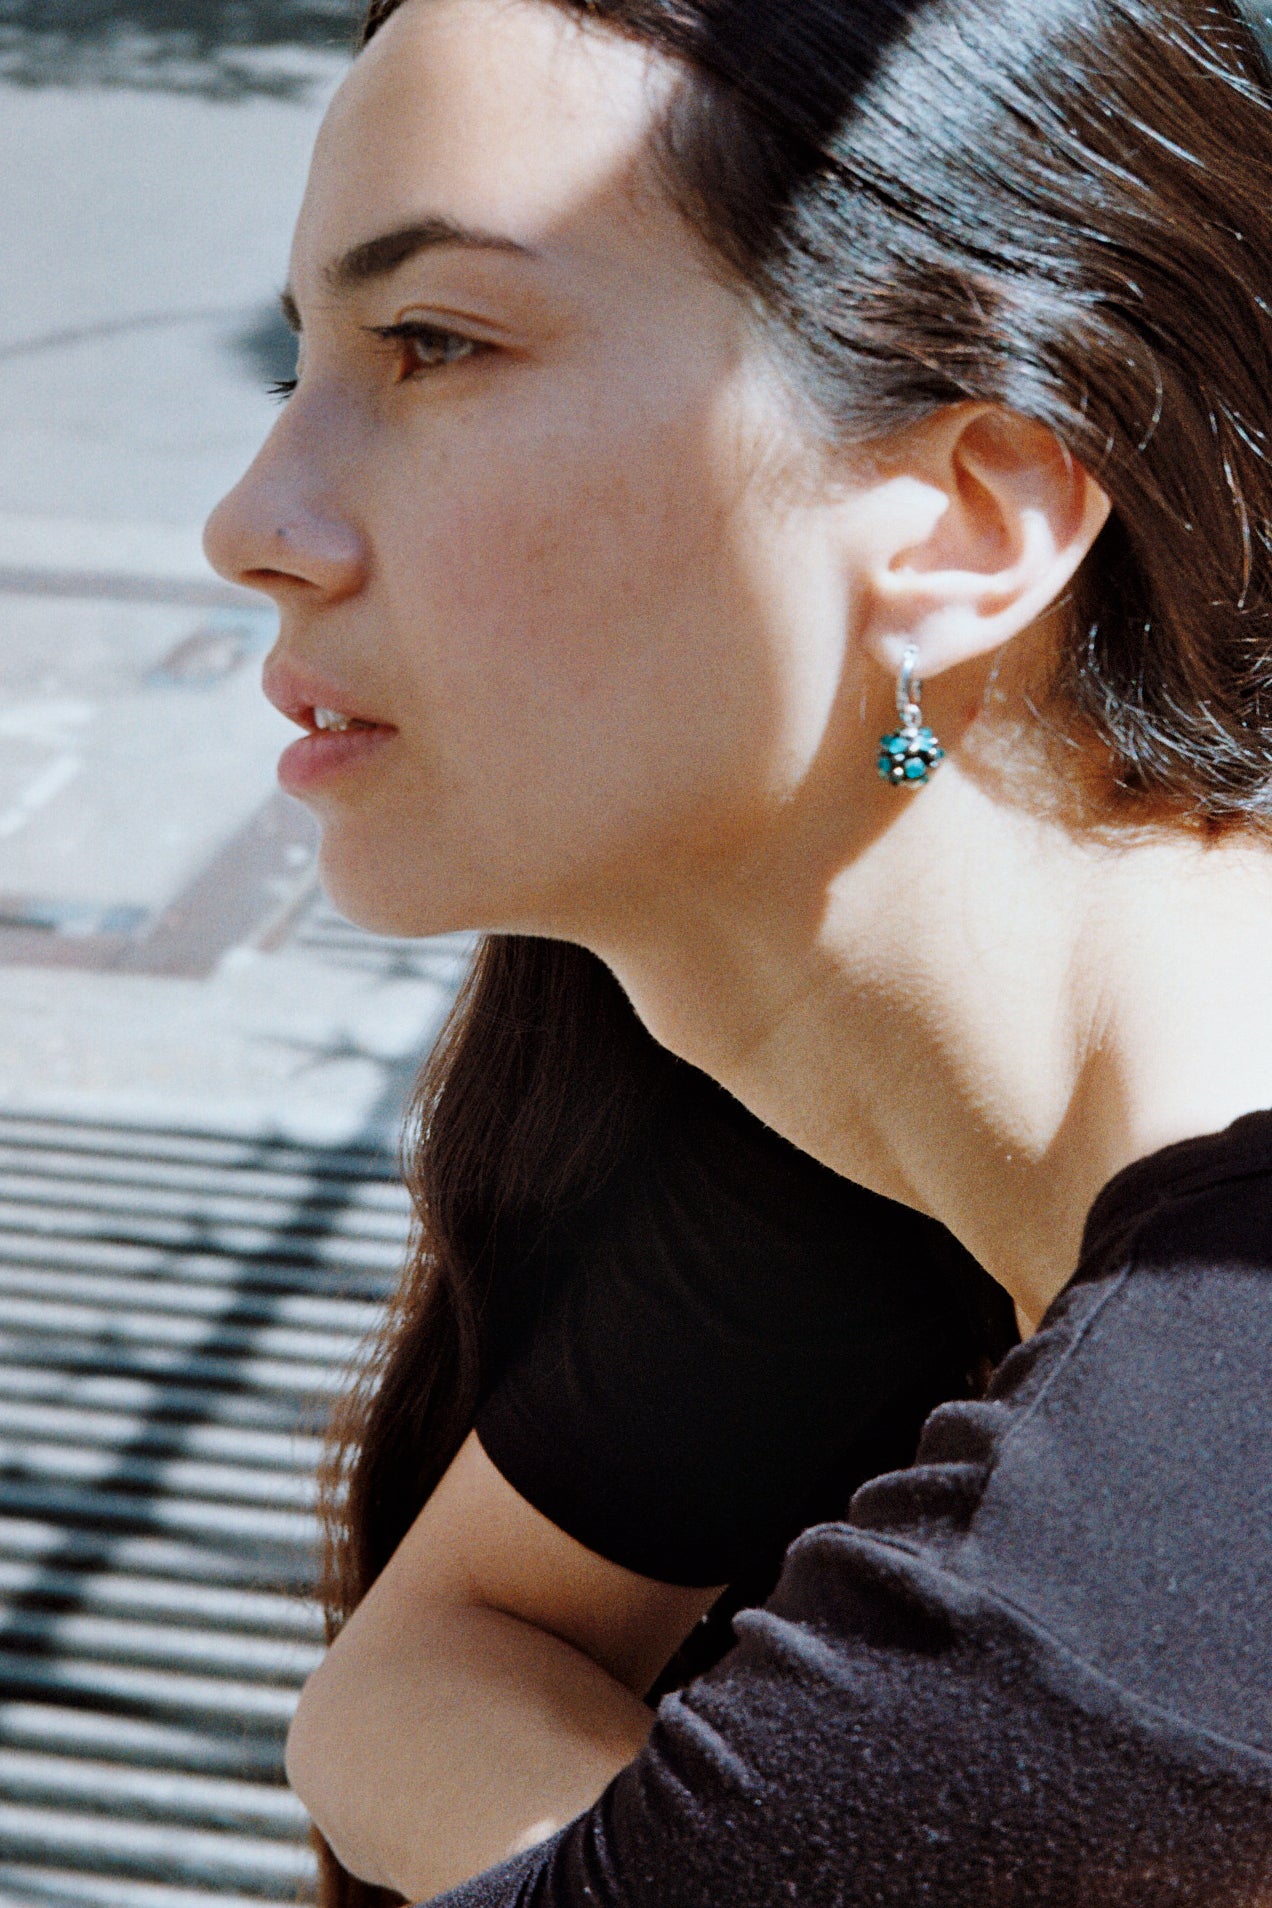 Division earrings - Turquoise